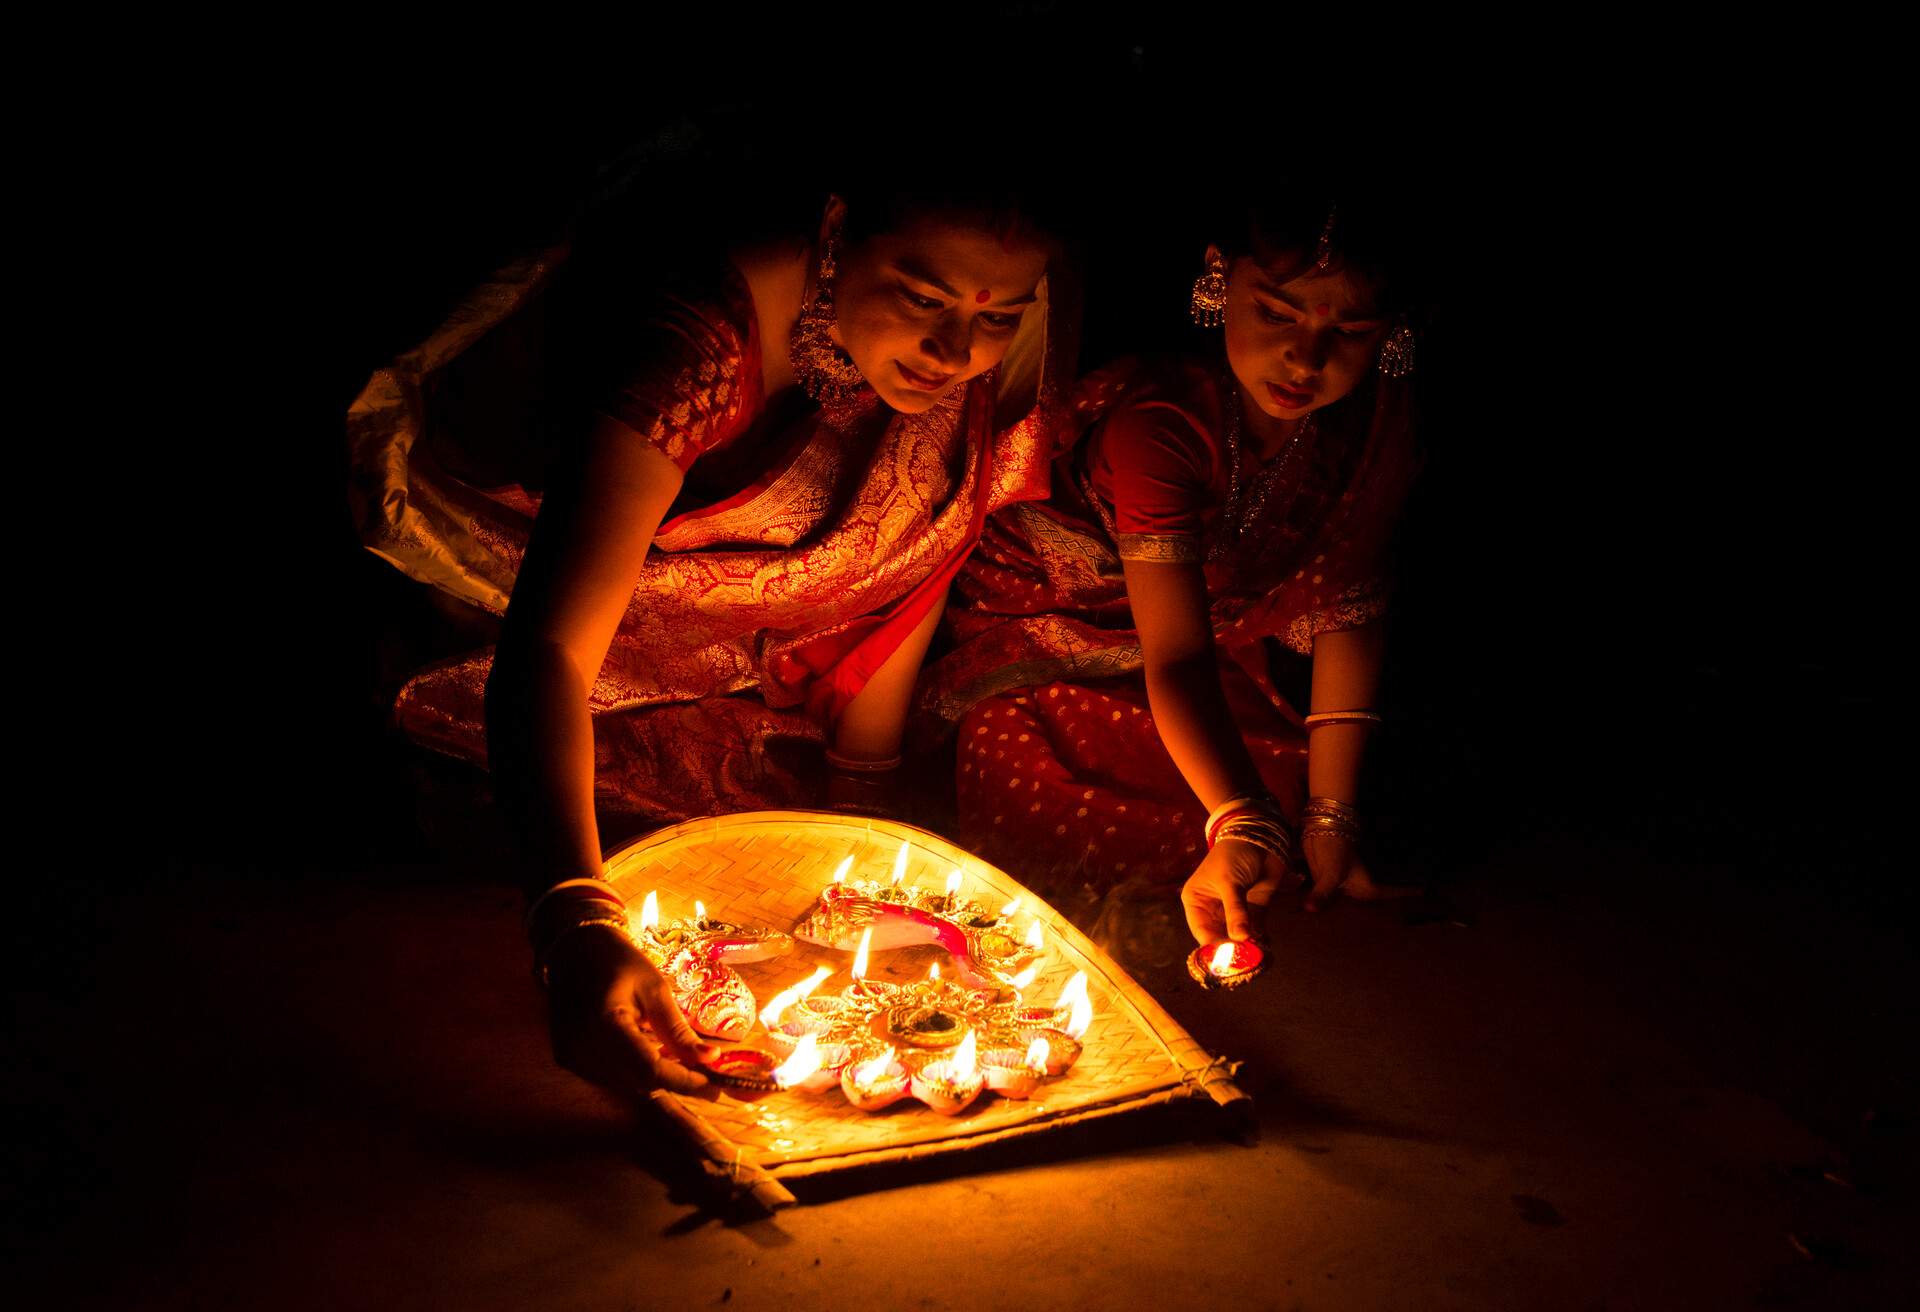 Two Indian ladies lit candles on clay lamps in their homes to celebrate the festival of lights.